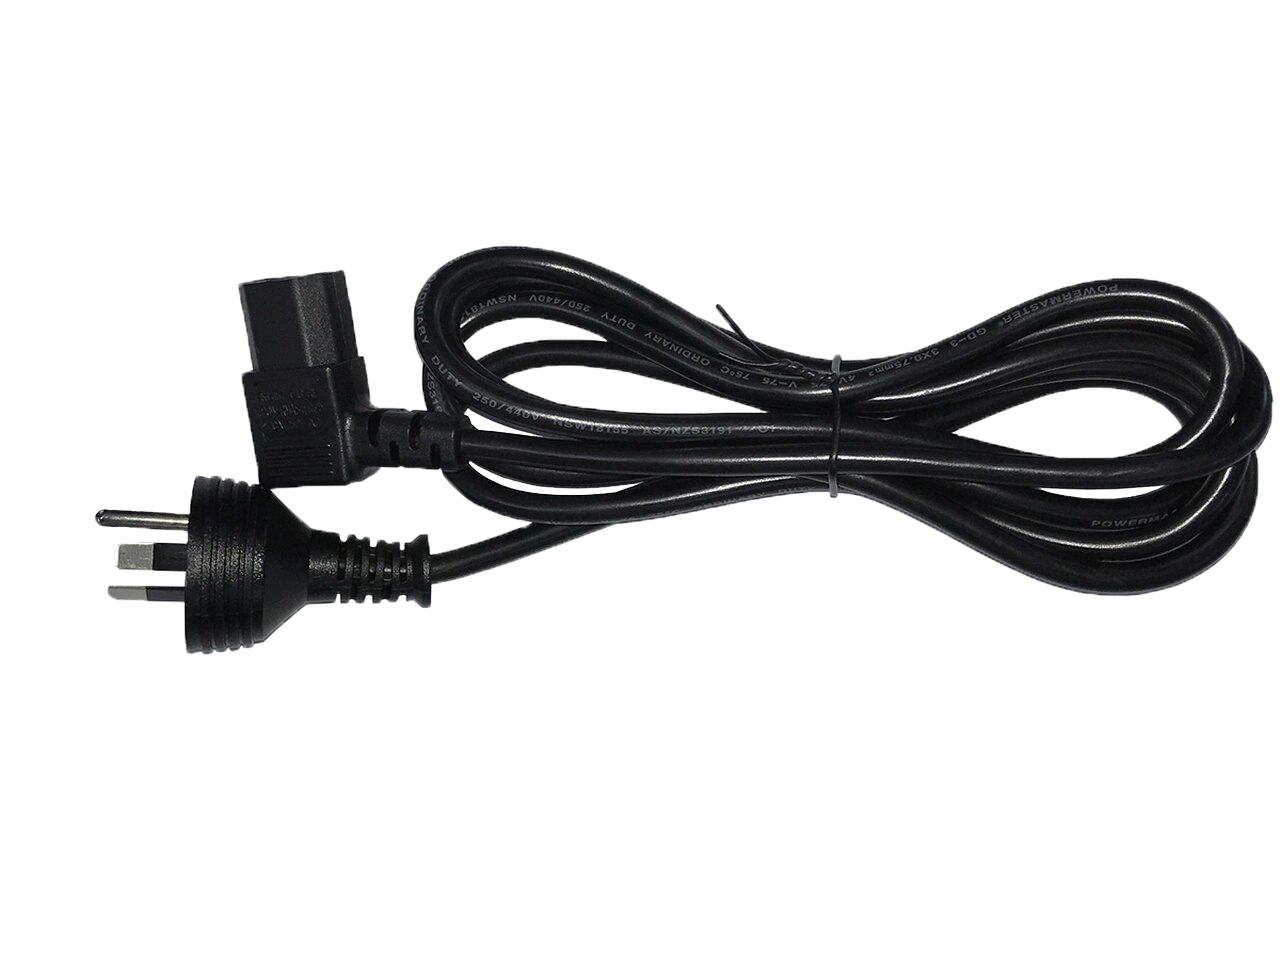 IEC-C13 2m Left-Hand Right Angle Power Cord in Black | Access ...